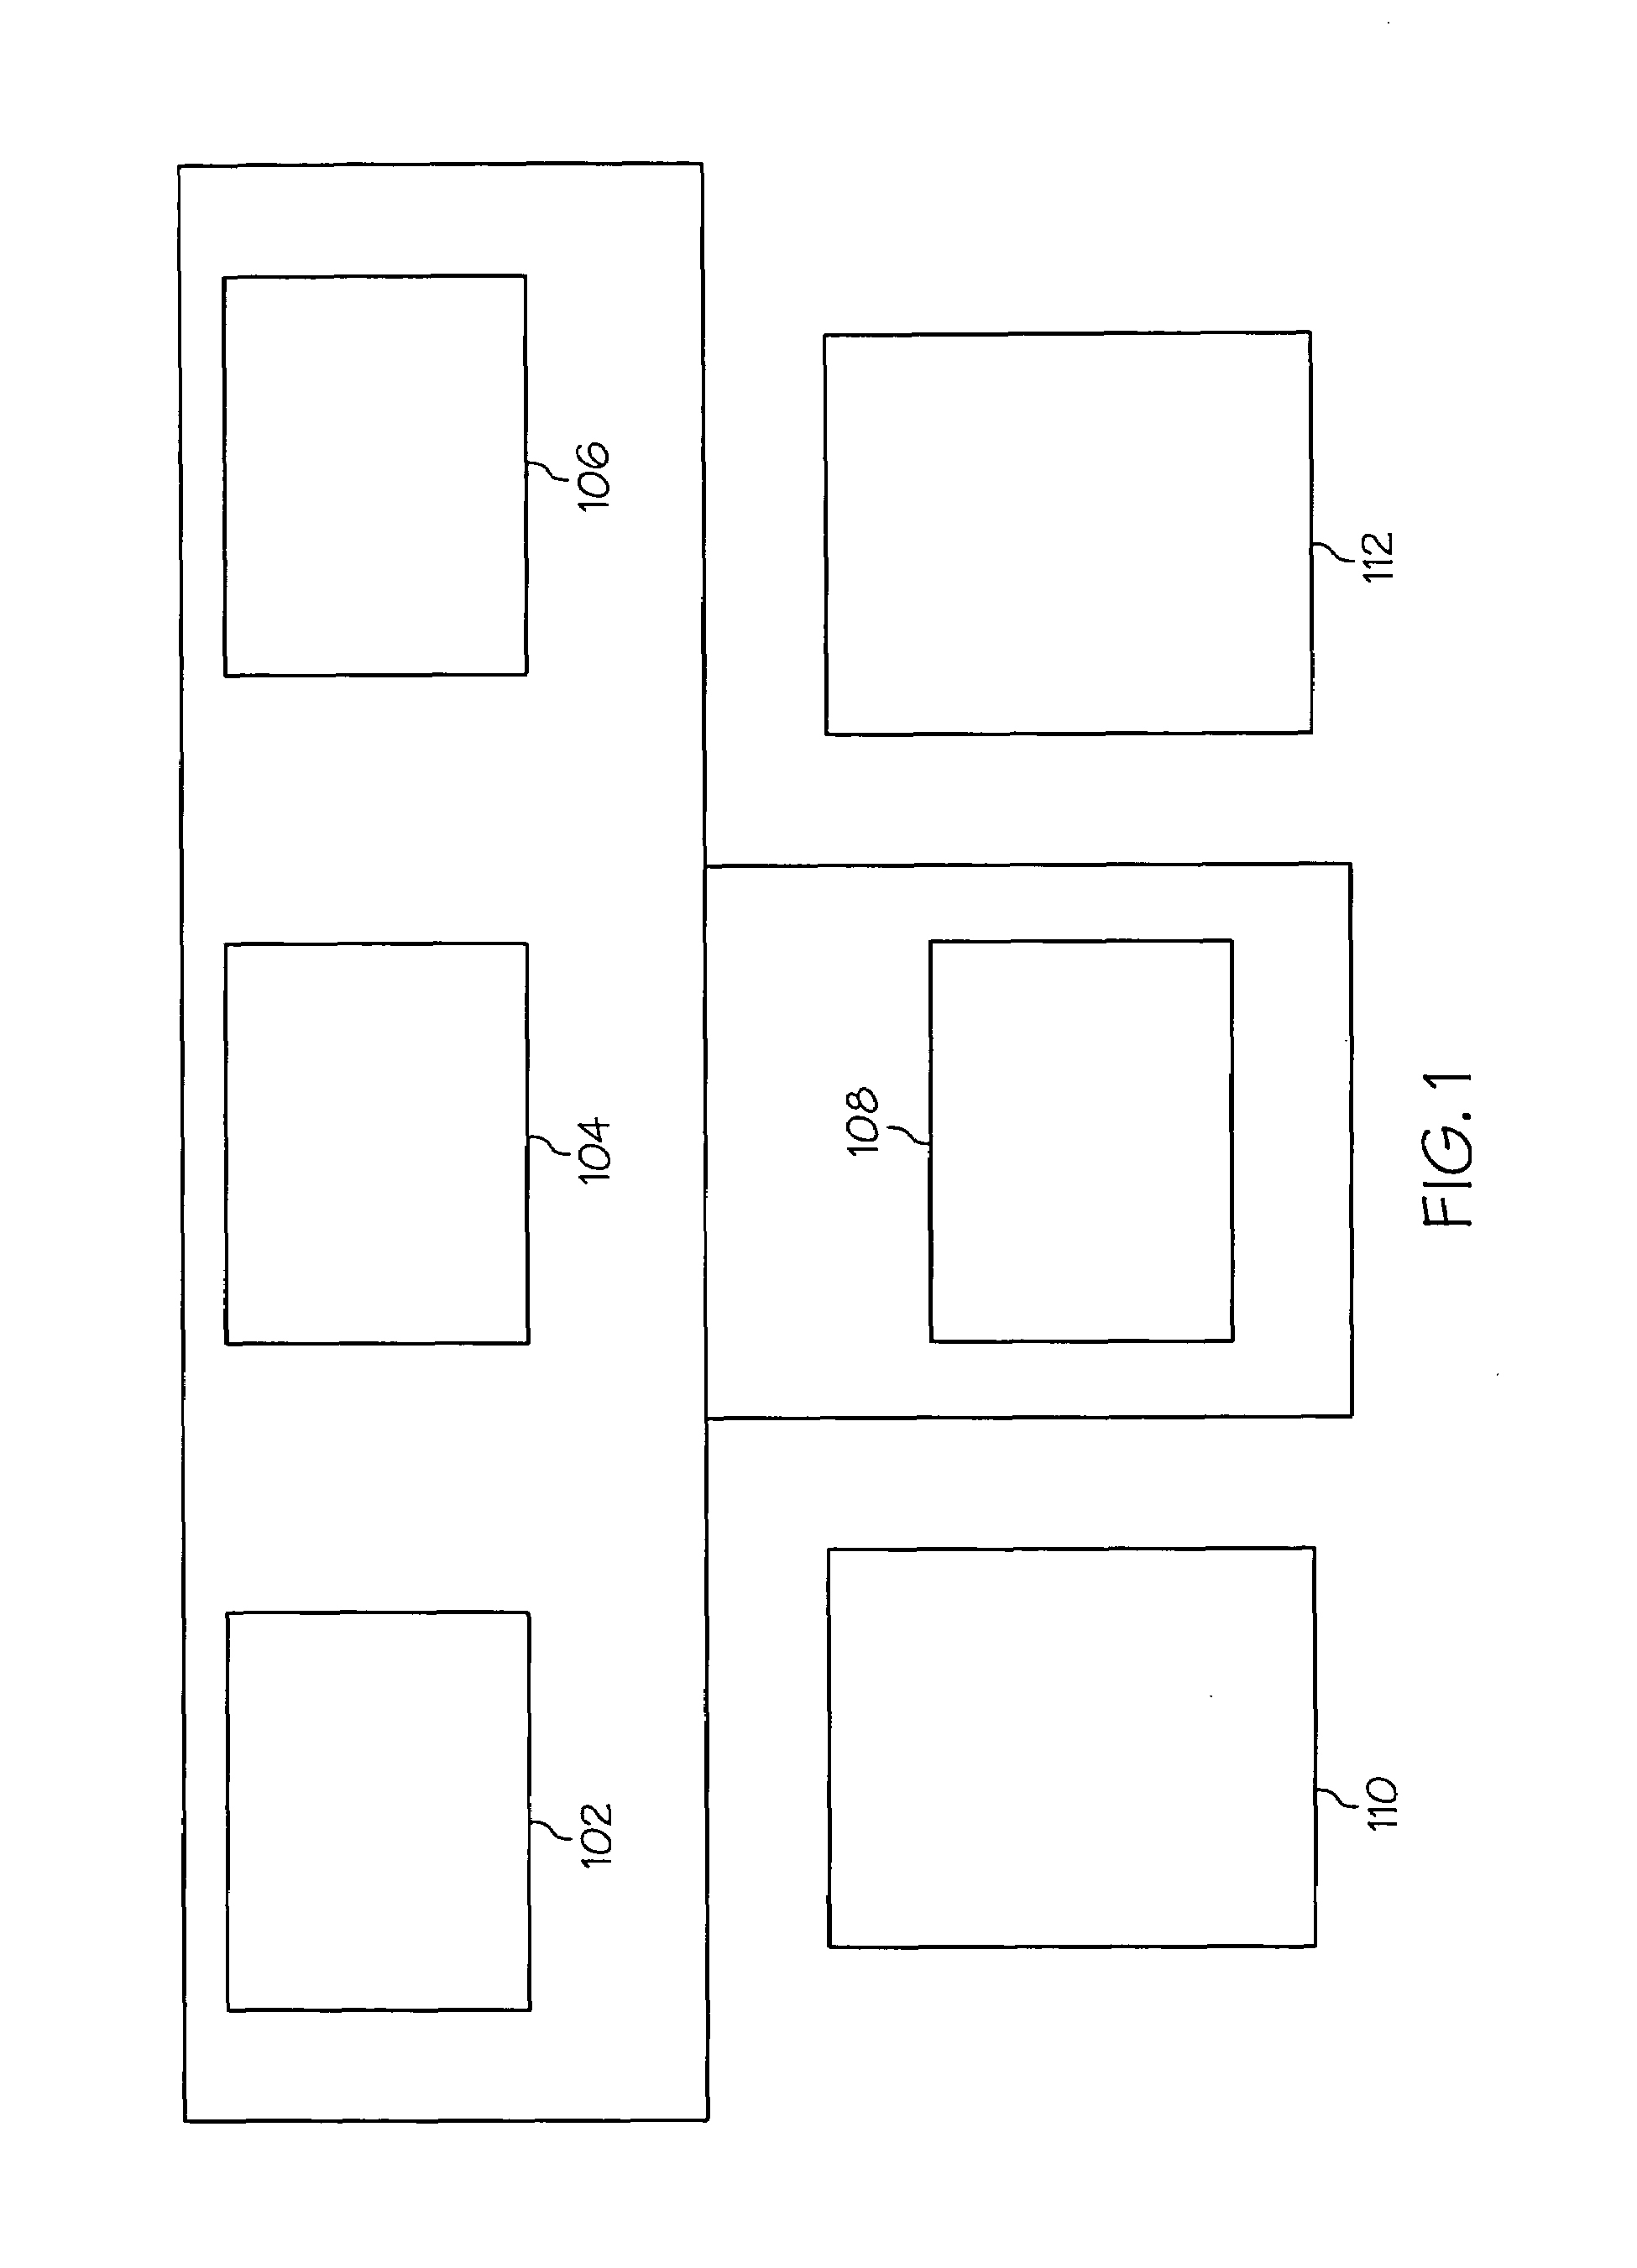 Method and apparatus for automatic display and removal of required synoptic pages in a checklist context